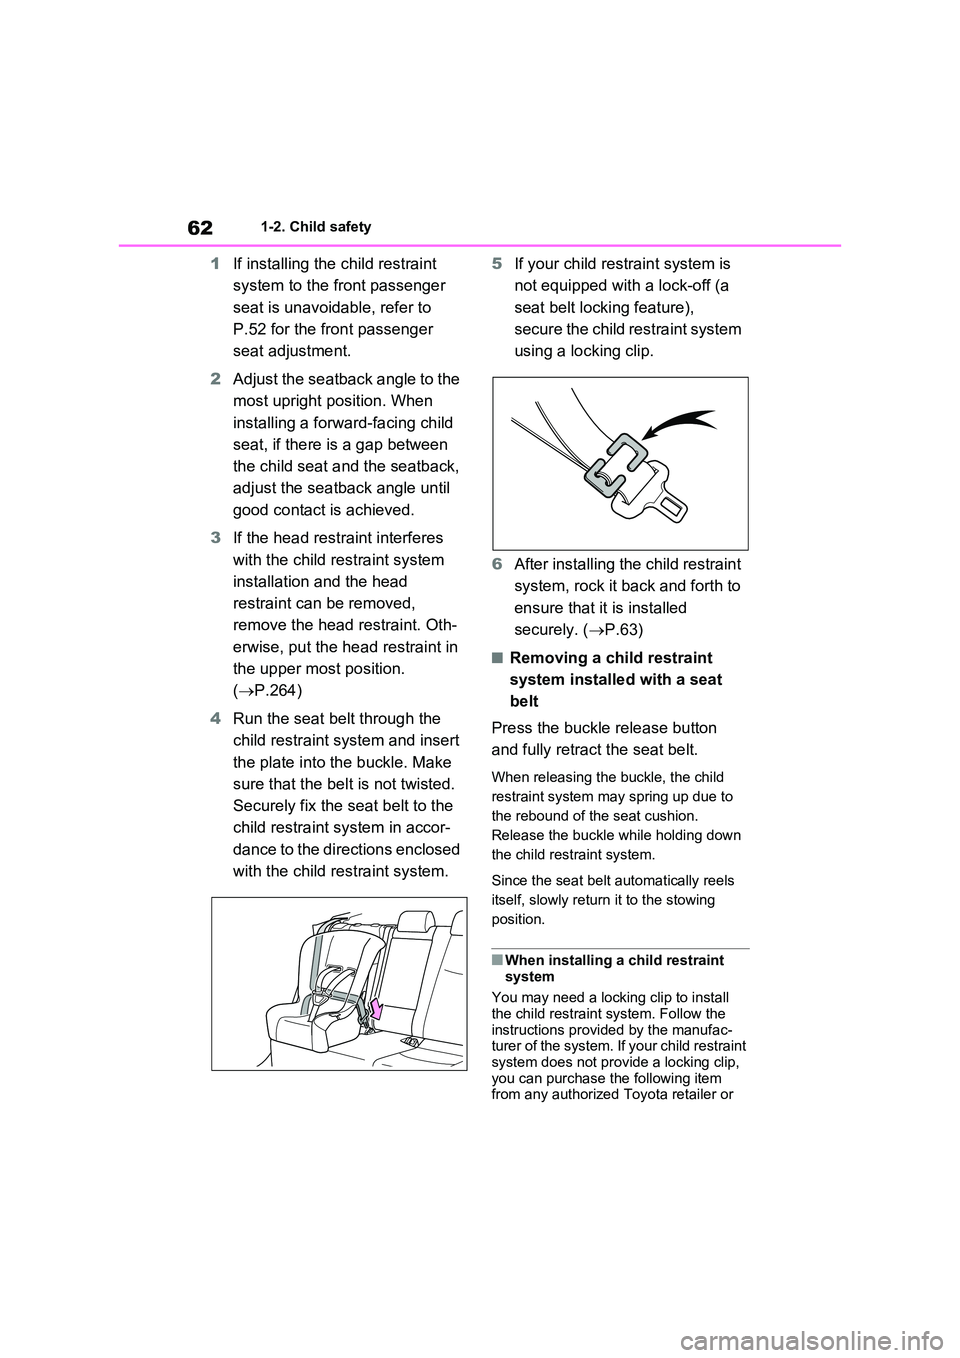 TOYOTA RAV4 PLUG-IN HYBRID 2023  Owners Manual 621-2. Child safety
1If installing the child restraint  
system to the front passenger  
seat is unavoidable, refer to  
P.52 for the front passenger  
seat adjustment. 
2 Adjust the seatback angle to